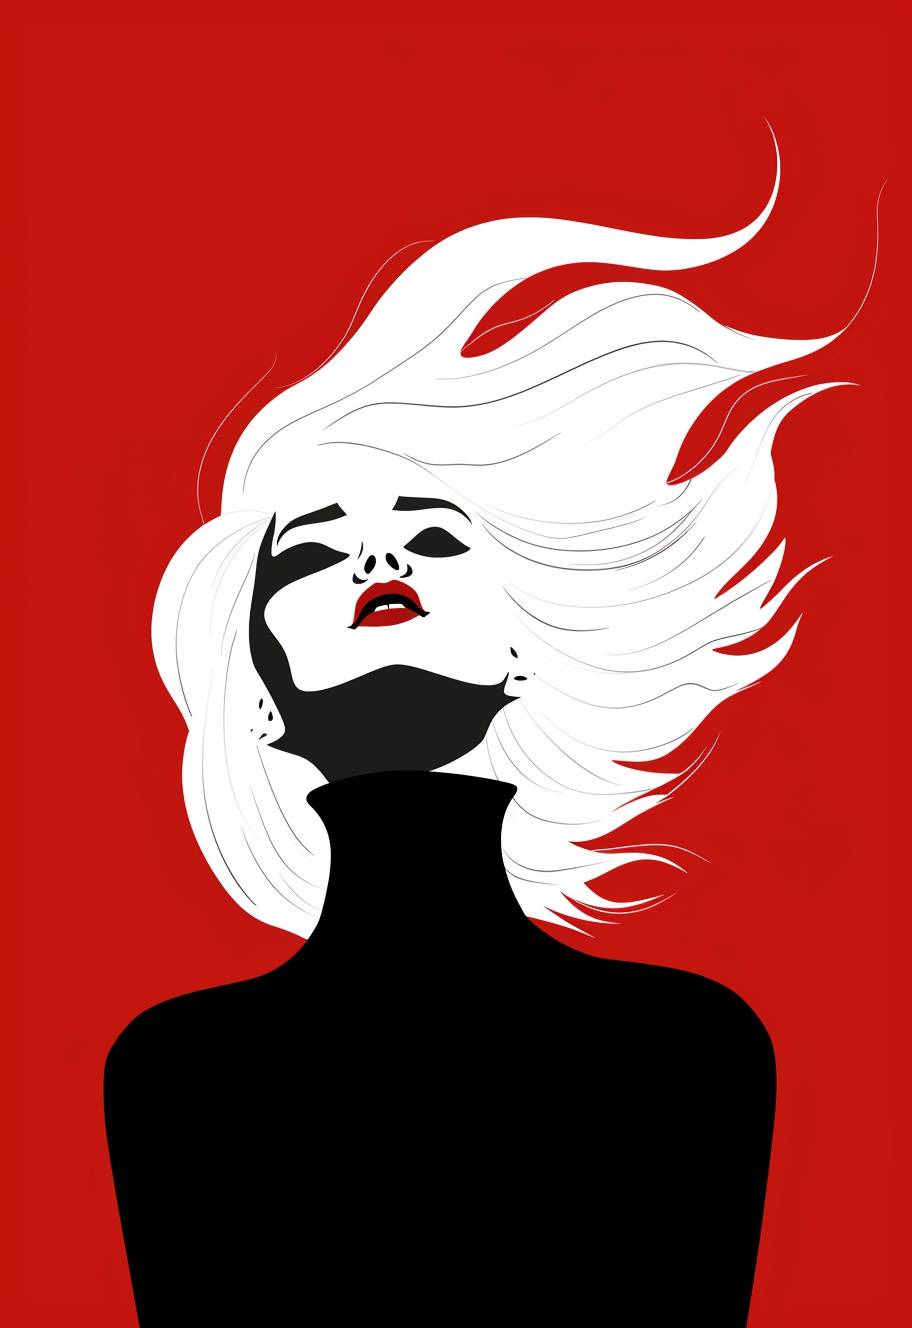 Minimalist retro illustration in the style of surreal women with white hair, black and white color palette against a red background with dark contrast, minimalism featuring simple shapes in a surreal style.